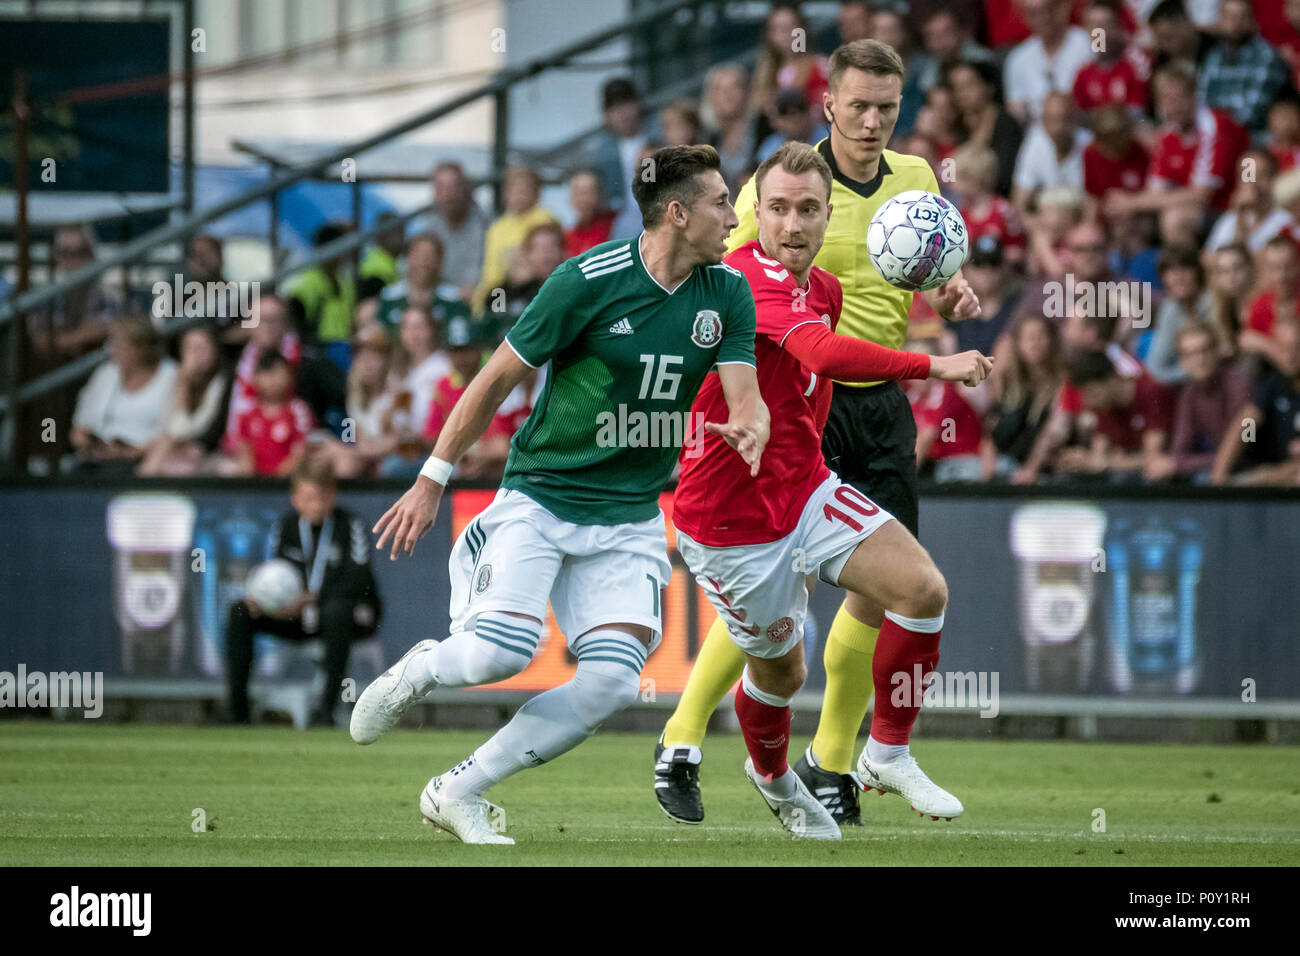 Denmark, Brøndby - June 09, 2018. Christian Eriksen (10) of Denmark and Hector Herrera (16) of Mexico seen during the football friendly between Denmark and Mexico at Brøndby Stadion. (Photo credit: Gonzales Photo - Kim M. Leland). Credit: Gonzales Photo/Alamy Live News Stock Photo